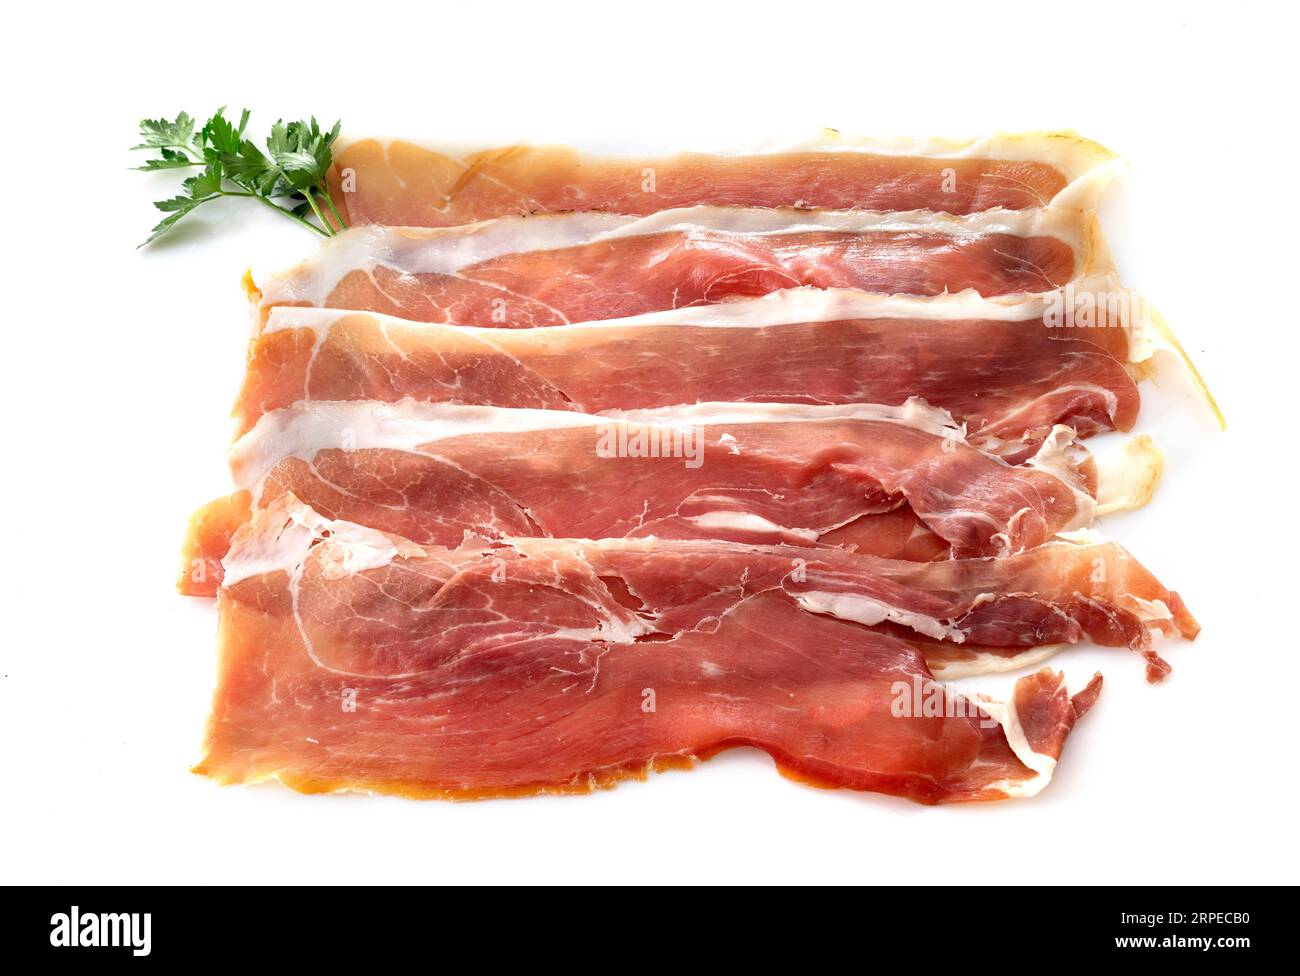 slice of cured ham serano in front of white background Stock Photo